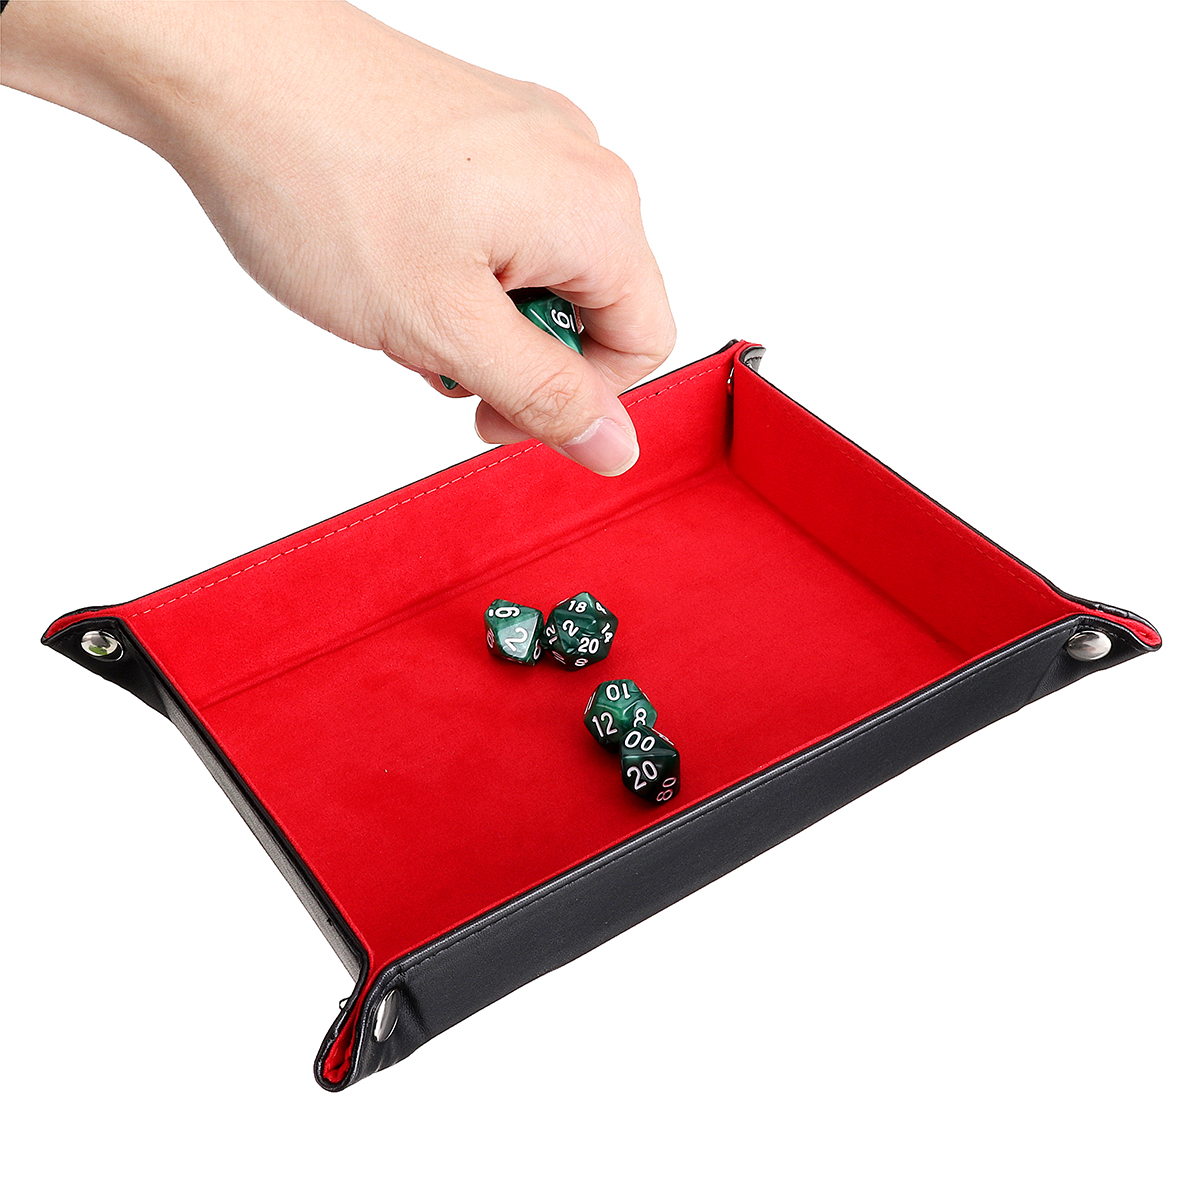 Multisided-Dice-Holder-Polyhedral-Dices-PU-Leather-Folding-Rectangle-Tray-for-RPG-1372549-10